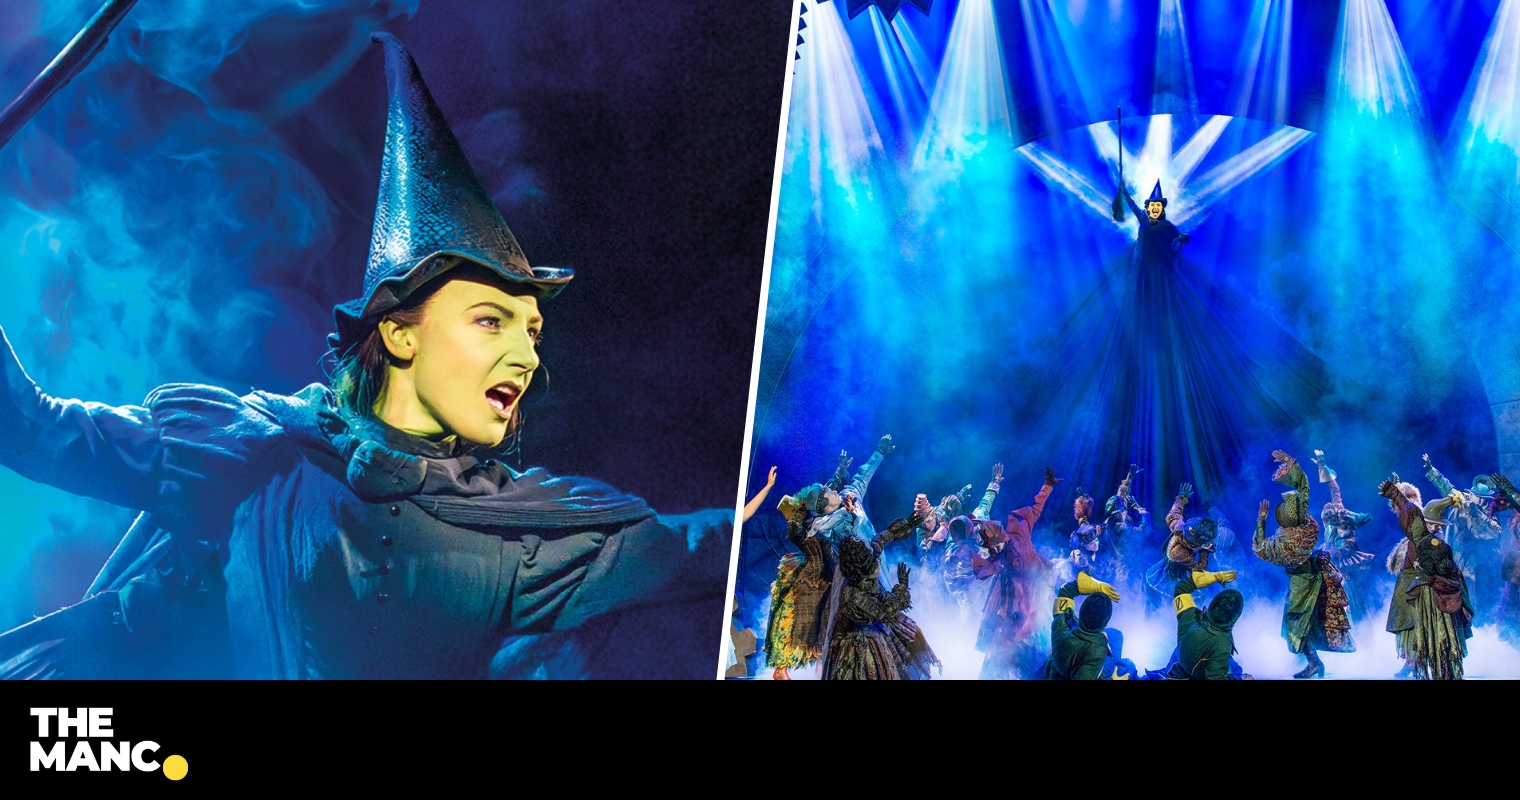 wicked tour manchester